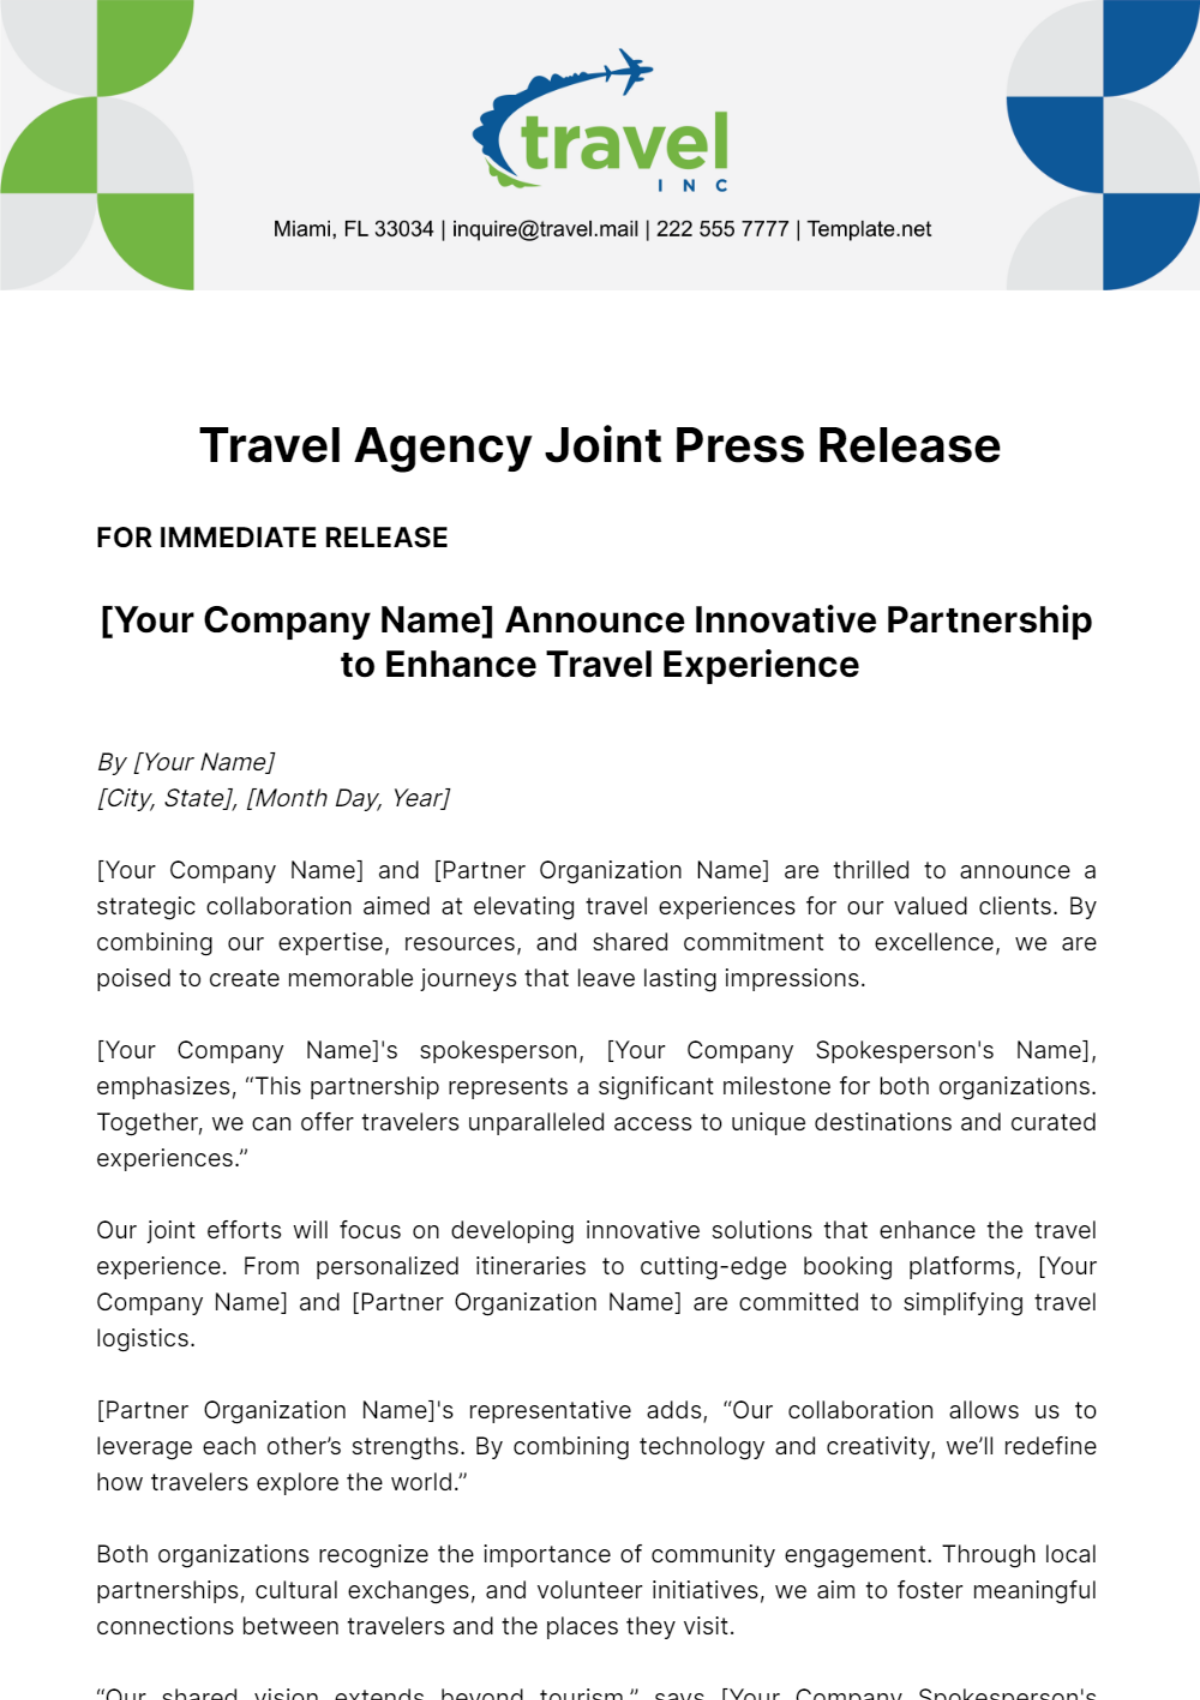 Travel Agency Joint Press Release Template